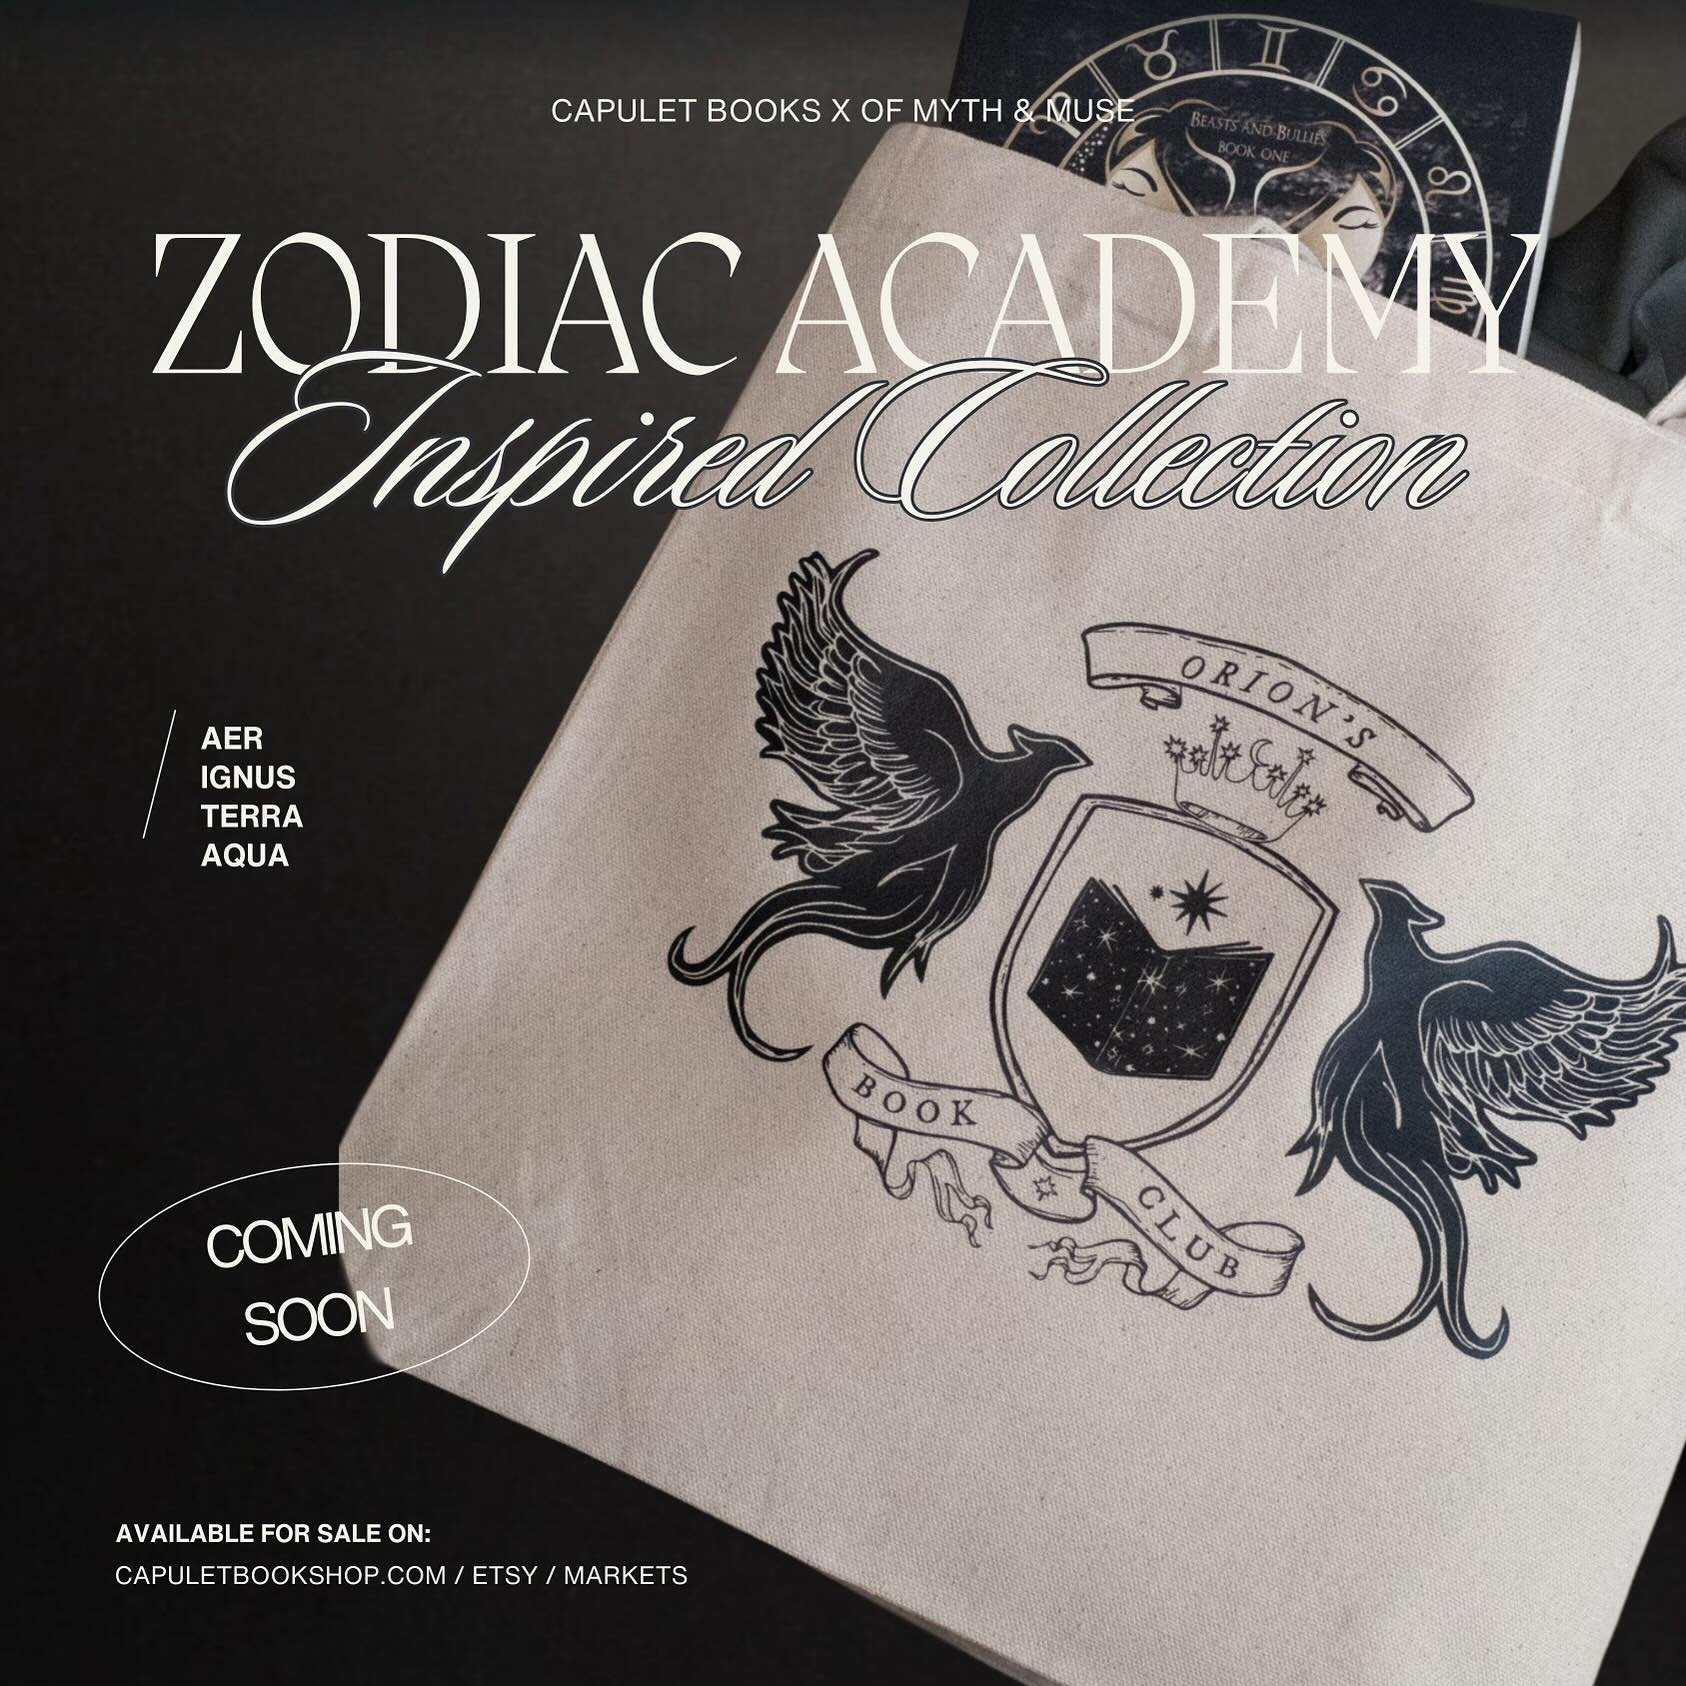 Officially announcing the Zodiac Academy Inspired Collection! What better way than to showcase Orion&rsquo;s Book Club Tote ✨ 

#zodiacacademymerch #lanceorion #bookishtotes #orionsbookclub #capuletbooks